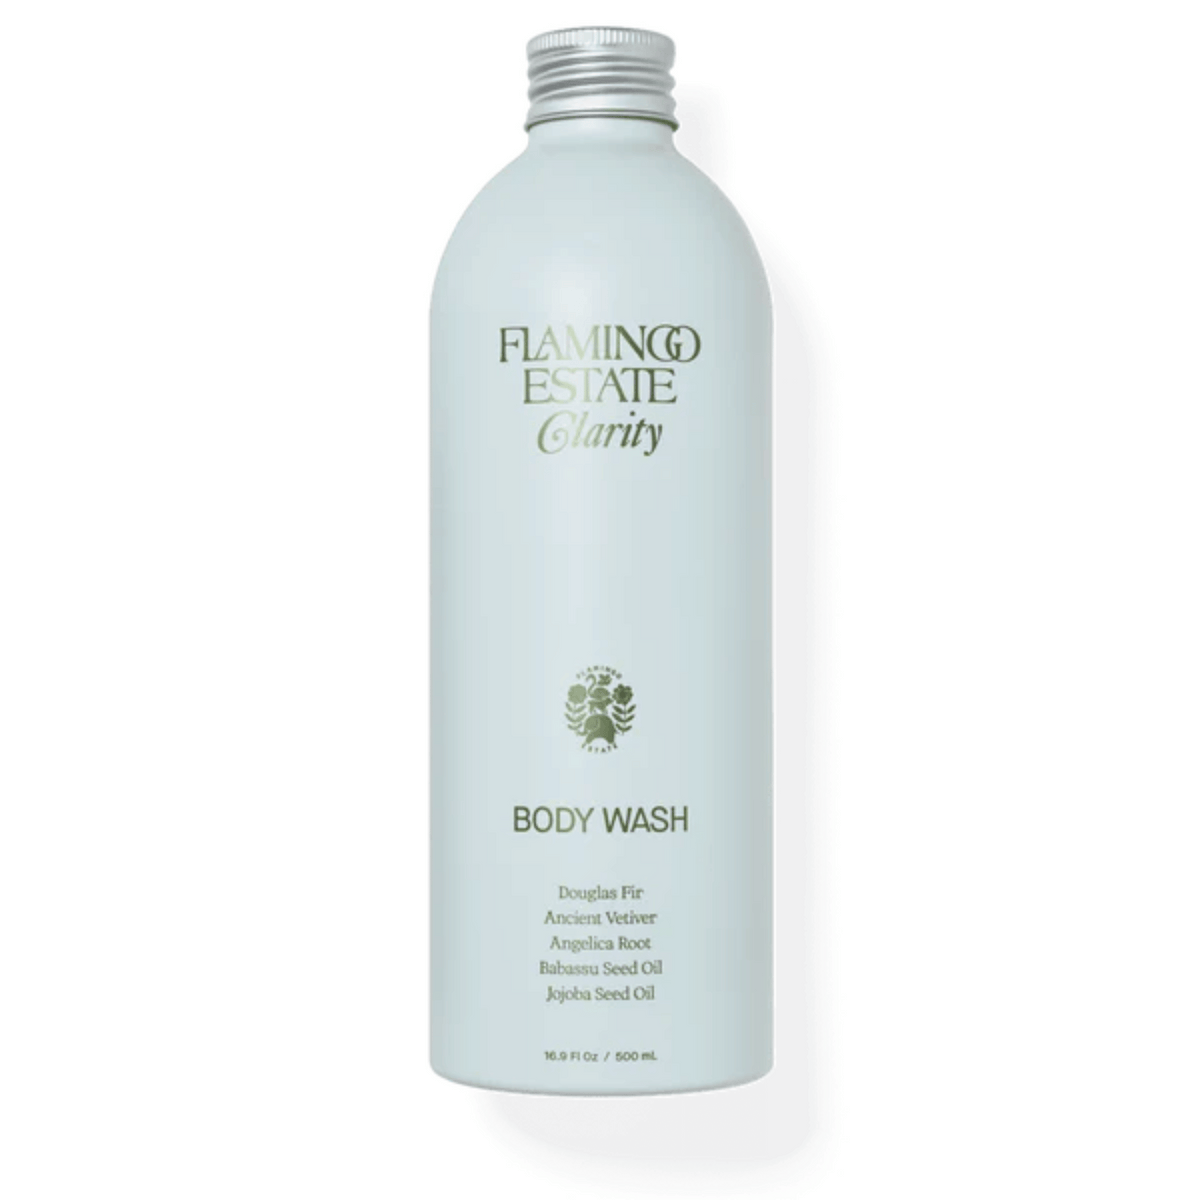 Primary Image of Clarity Body Wash